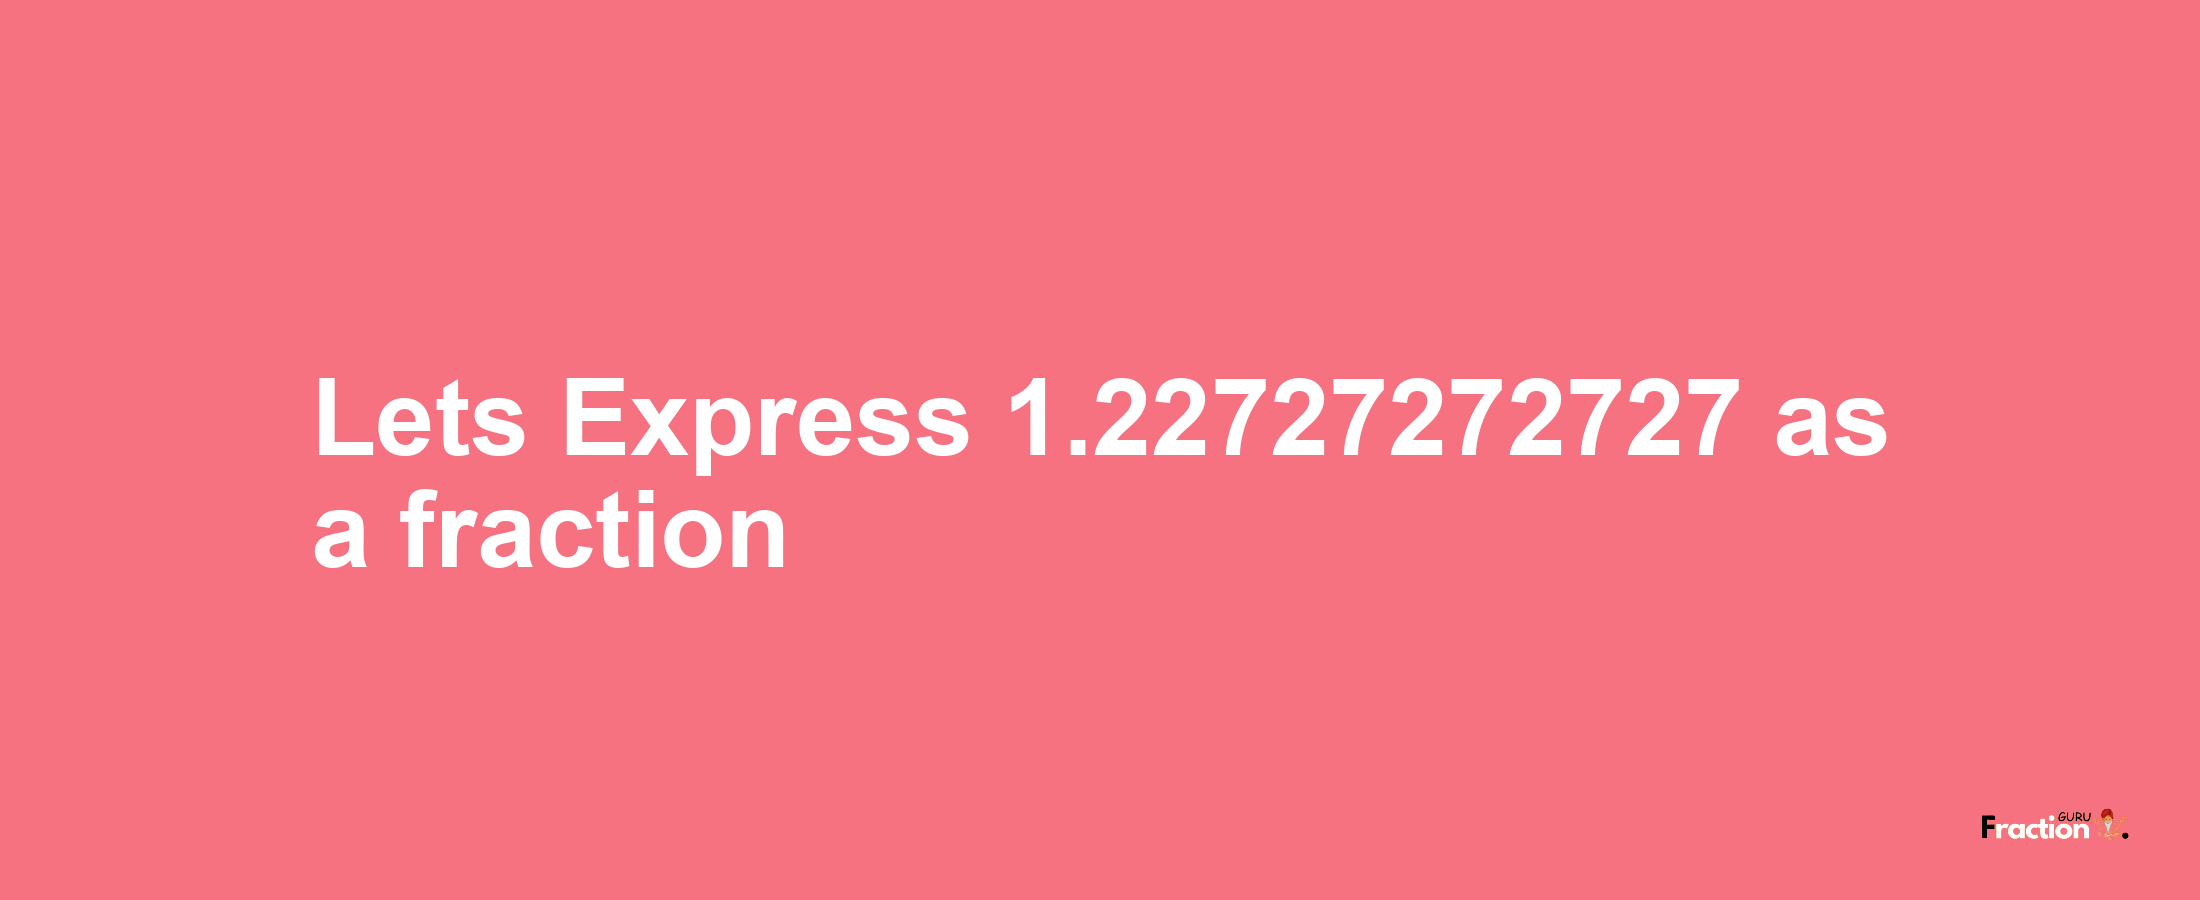 Lets Express 1.22727272727 as afraction